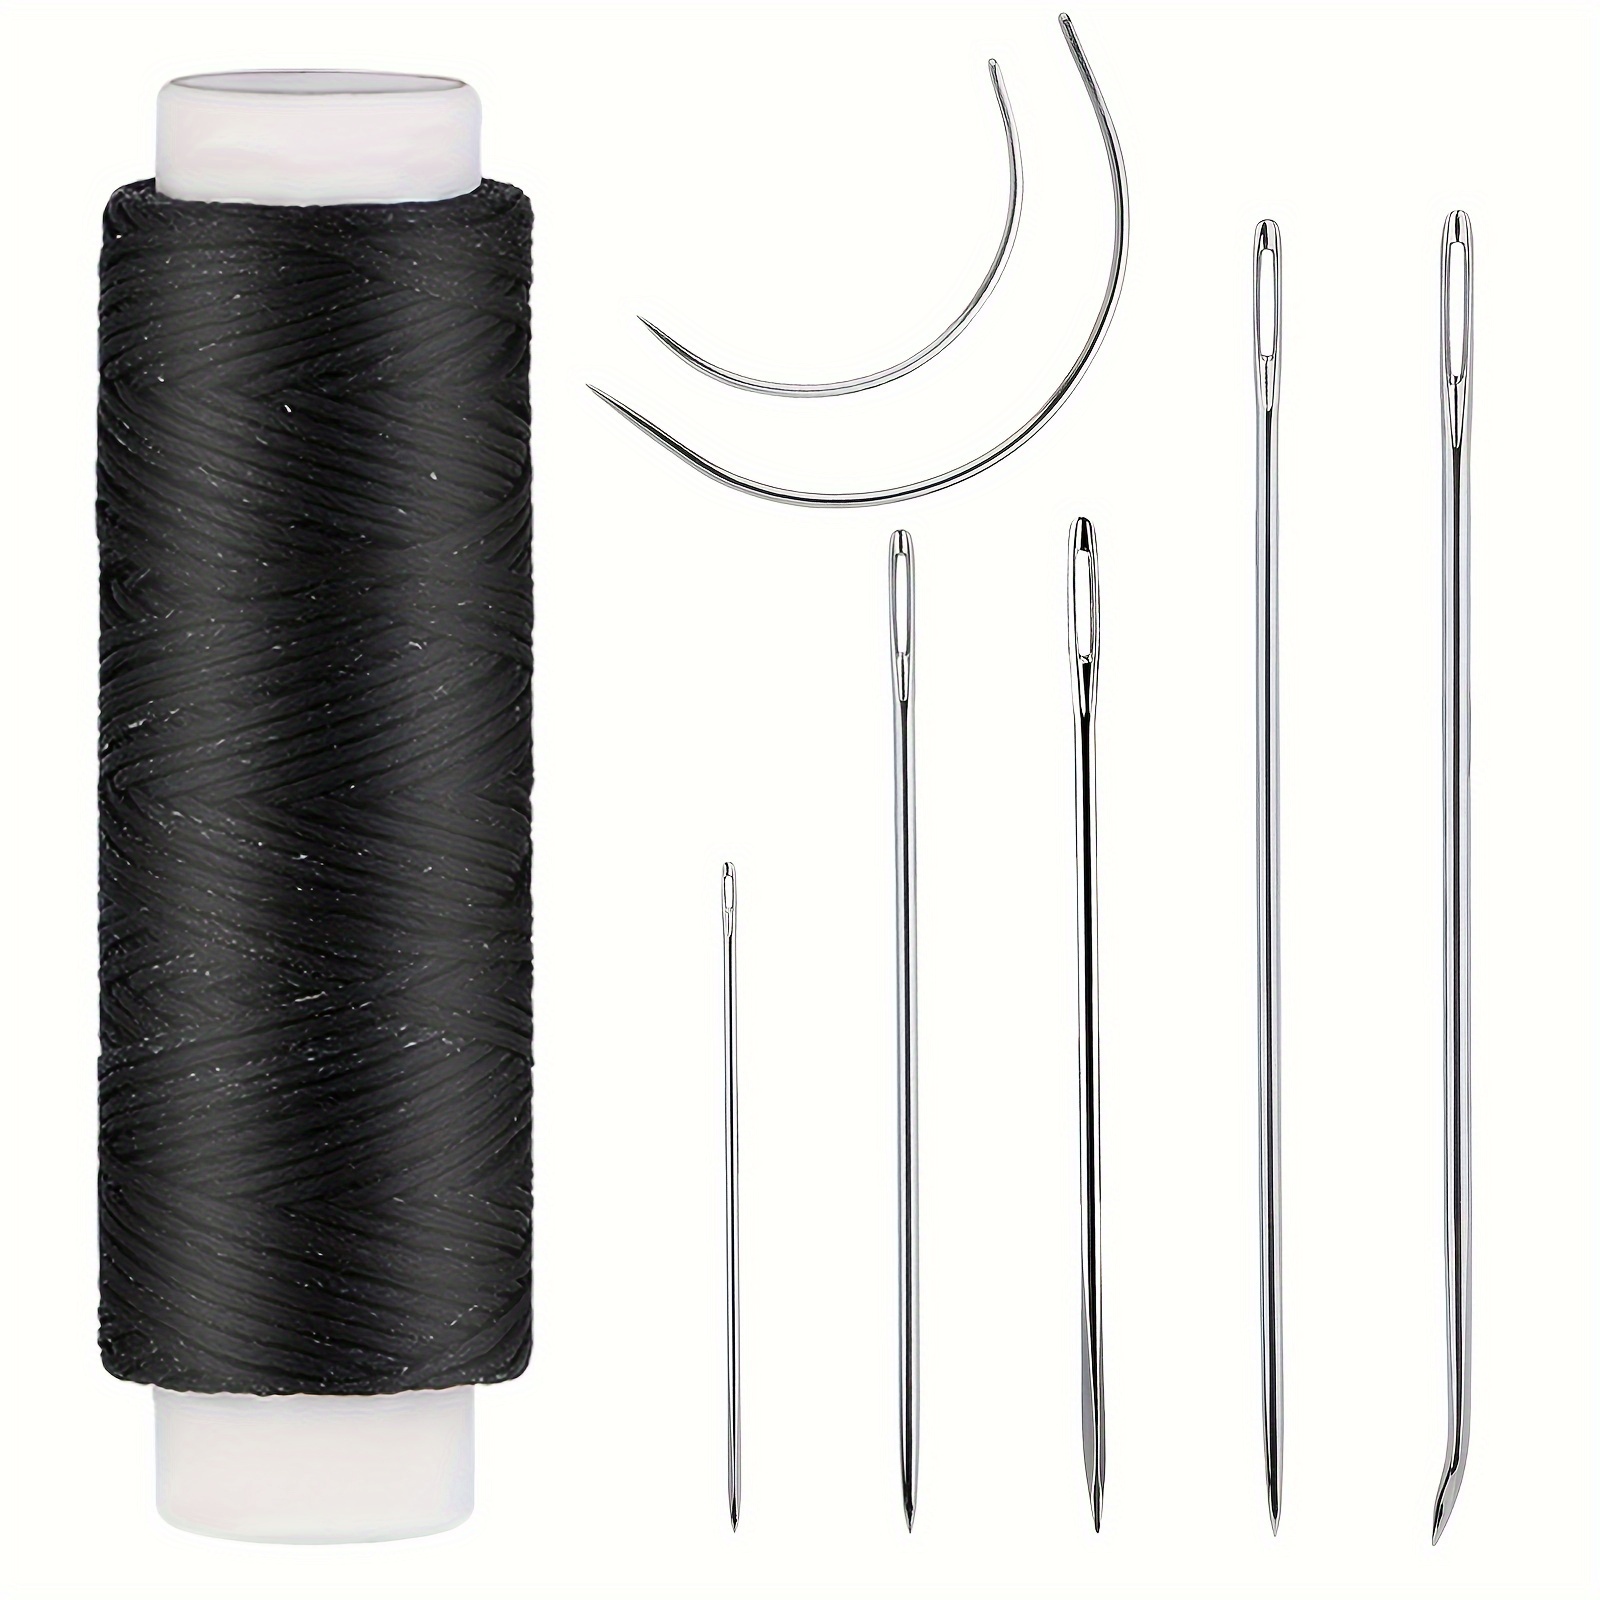 Pack of 20 Hand Sewing Needles + Upholstery Thread + Sewing